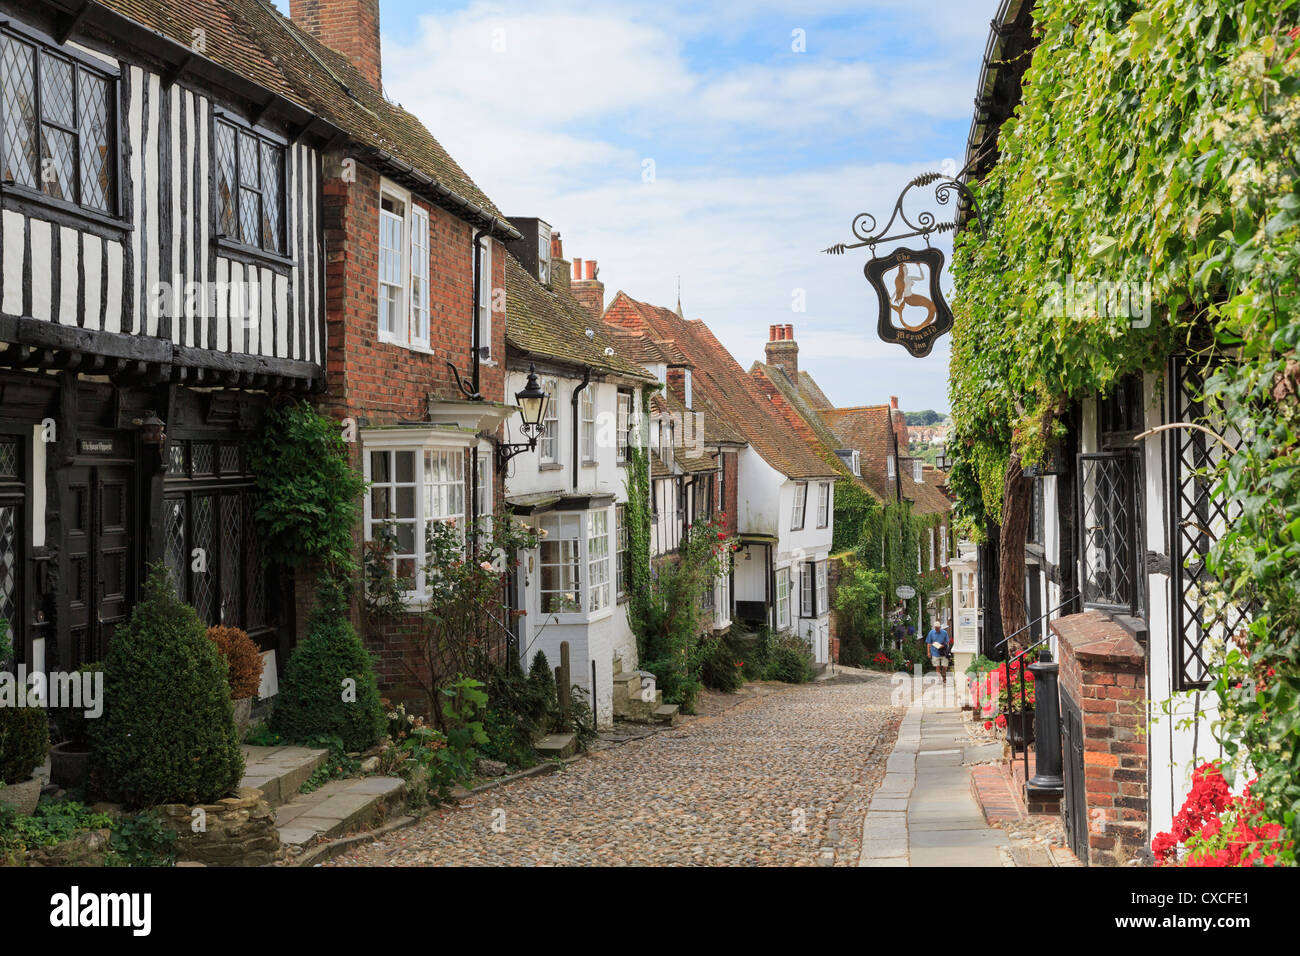 Famous narrow cobbled street with quaint old houses and haunted inn in historic Cinque Port town. Mermaid Street Rye East Sussex England UK Britain Stock Photo